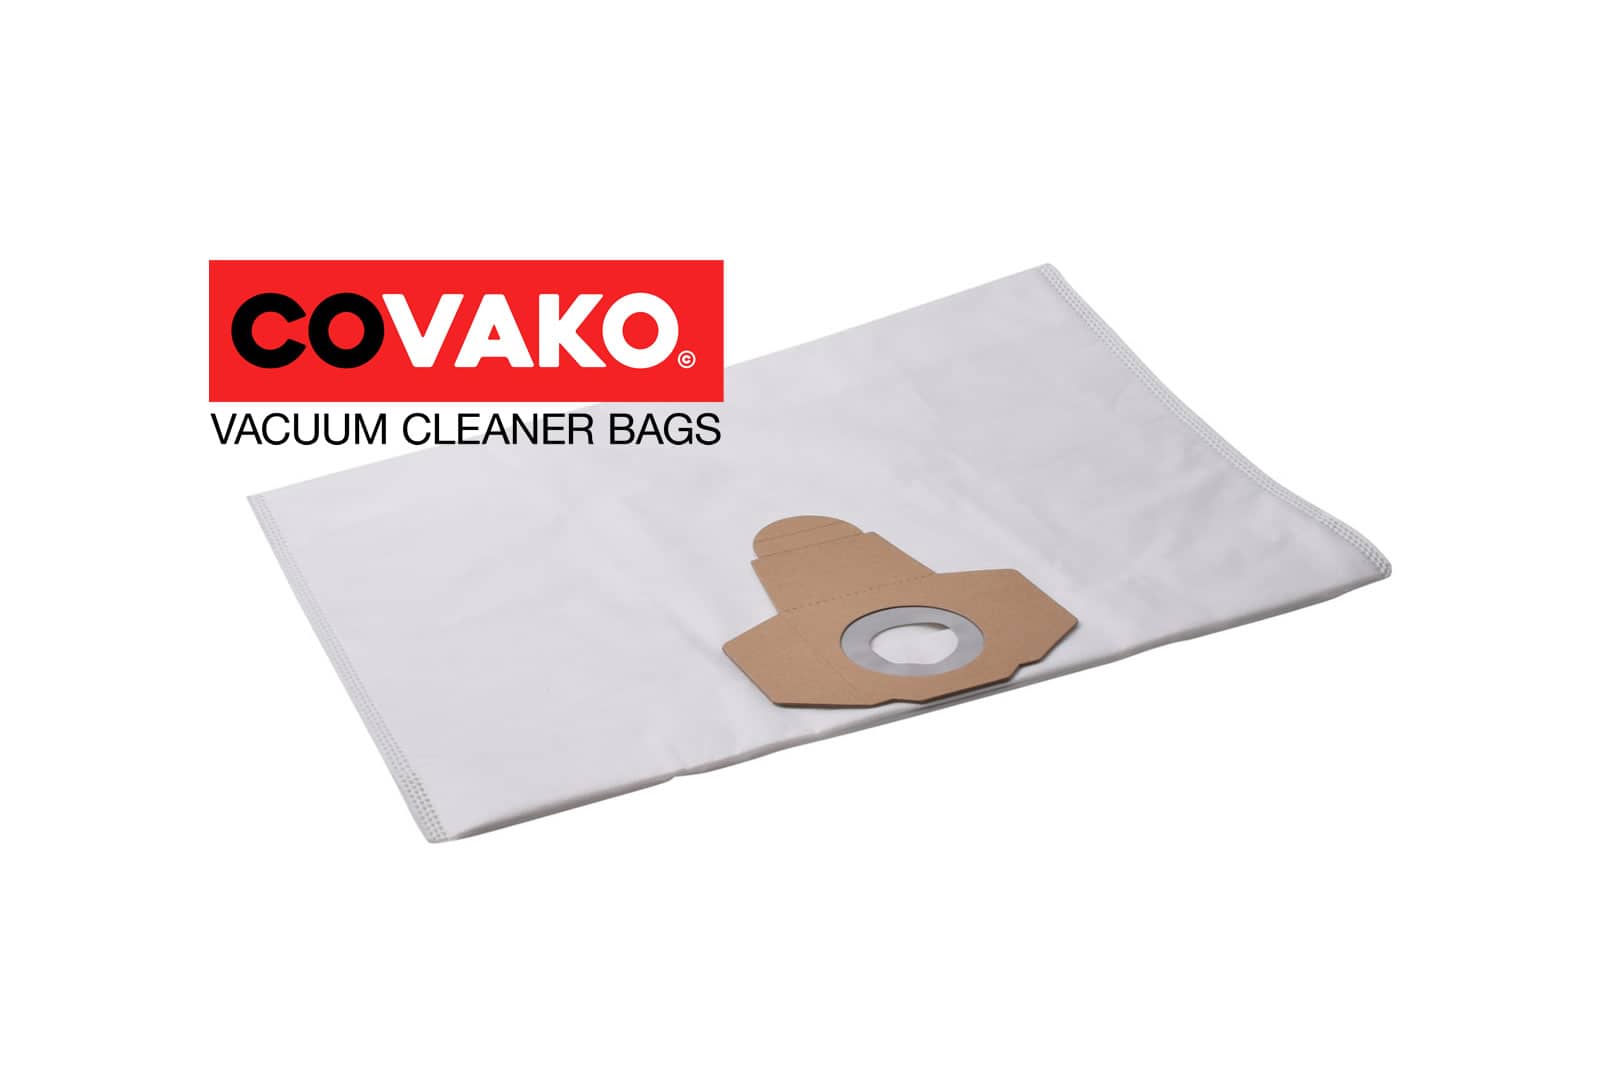 Lidl PNTS 1250 / Synthesis - Lidl vacuum cleaner bags